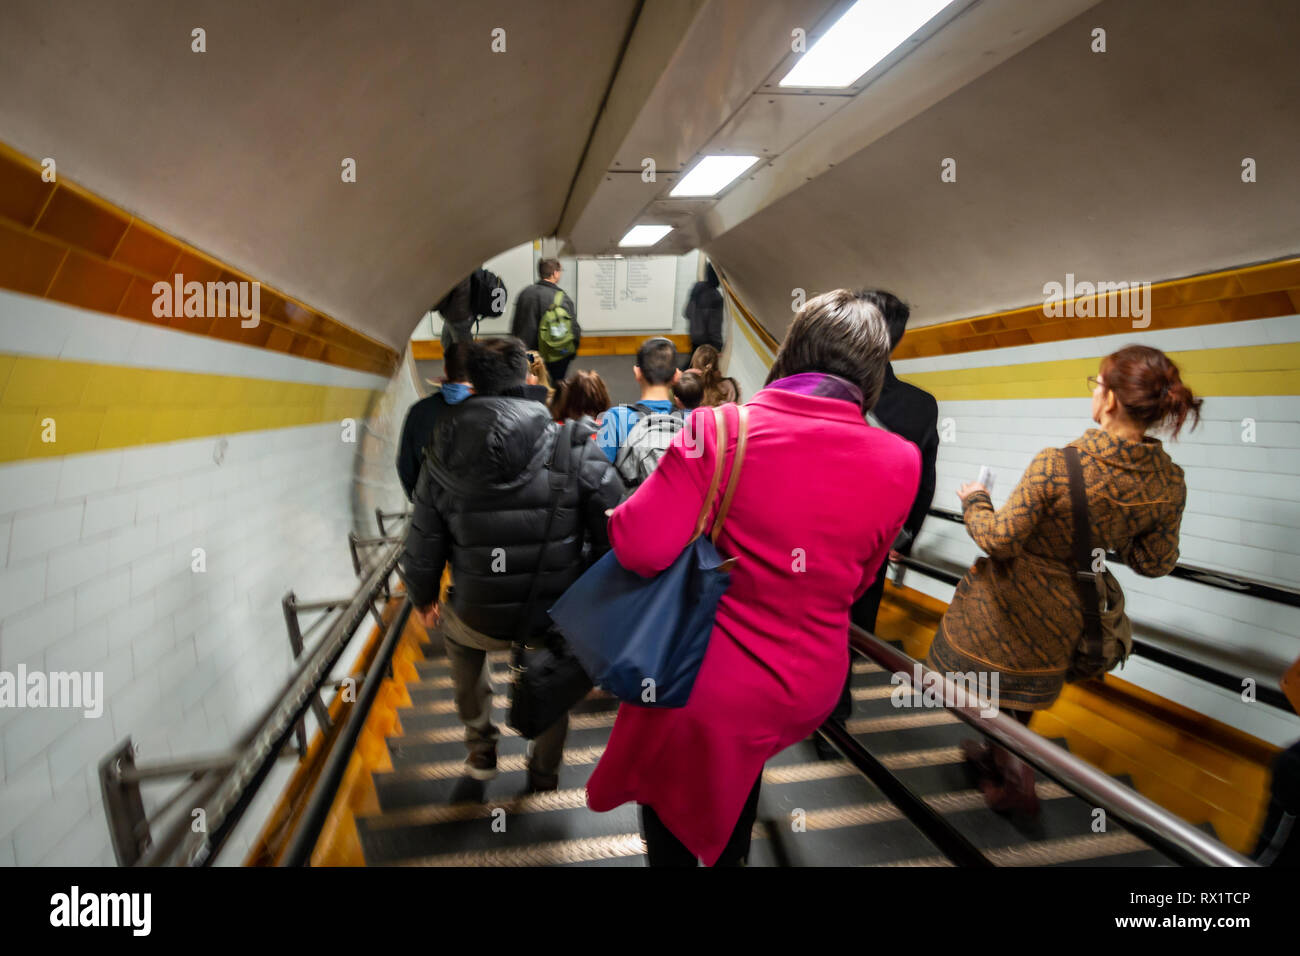 Rear view of Rush Hour Underground Tube commuters time as they travel down the stairs and passageways leading to the Tube in London Stock Photo